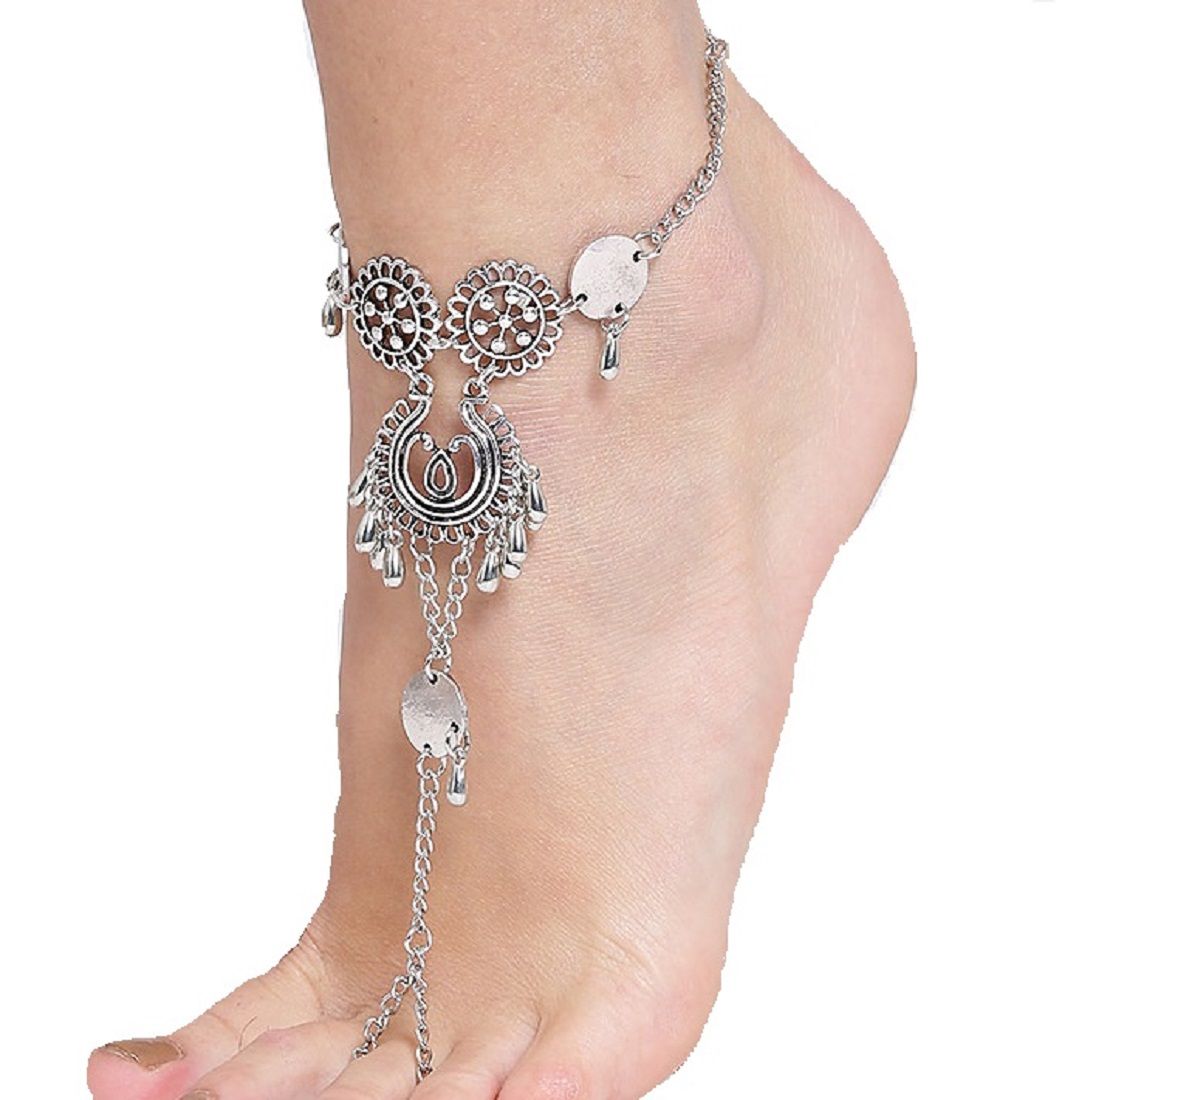 White Metal Anklet + Adjustable Toe Ring Payal for Women Girls with Pair of Toe  Ring Set Barefoot Imitations Jewellery